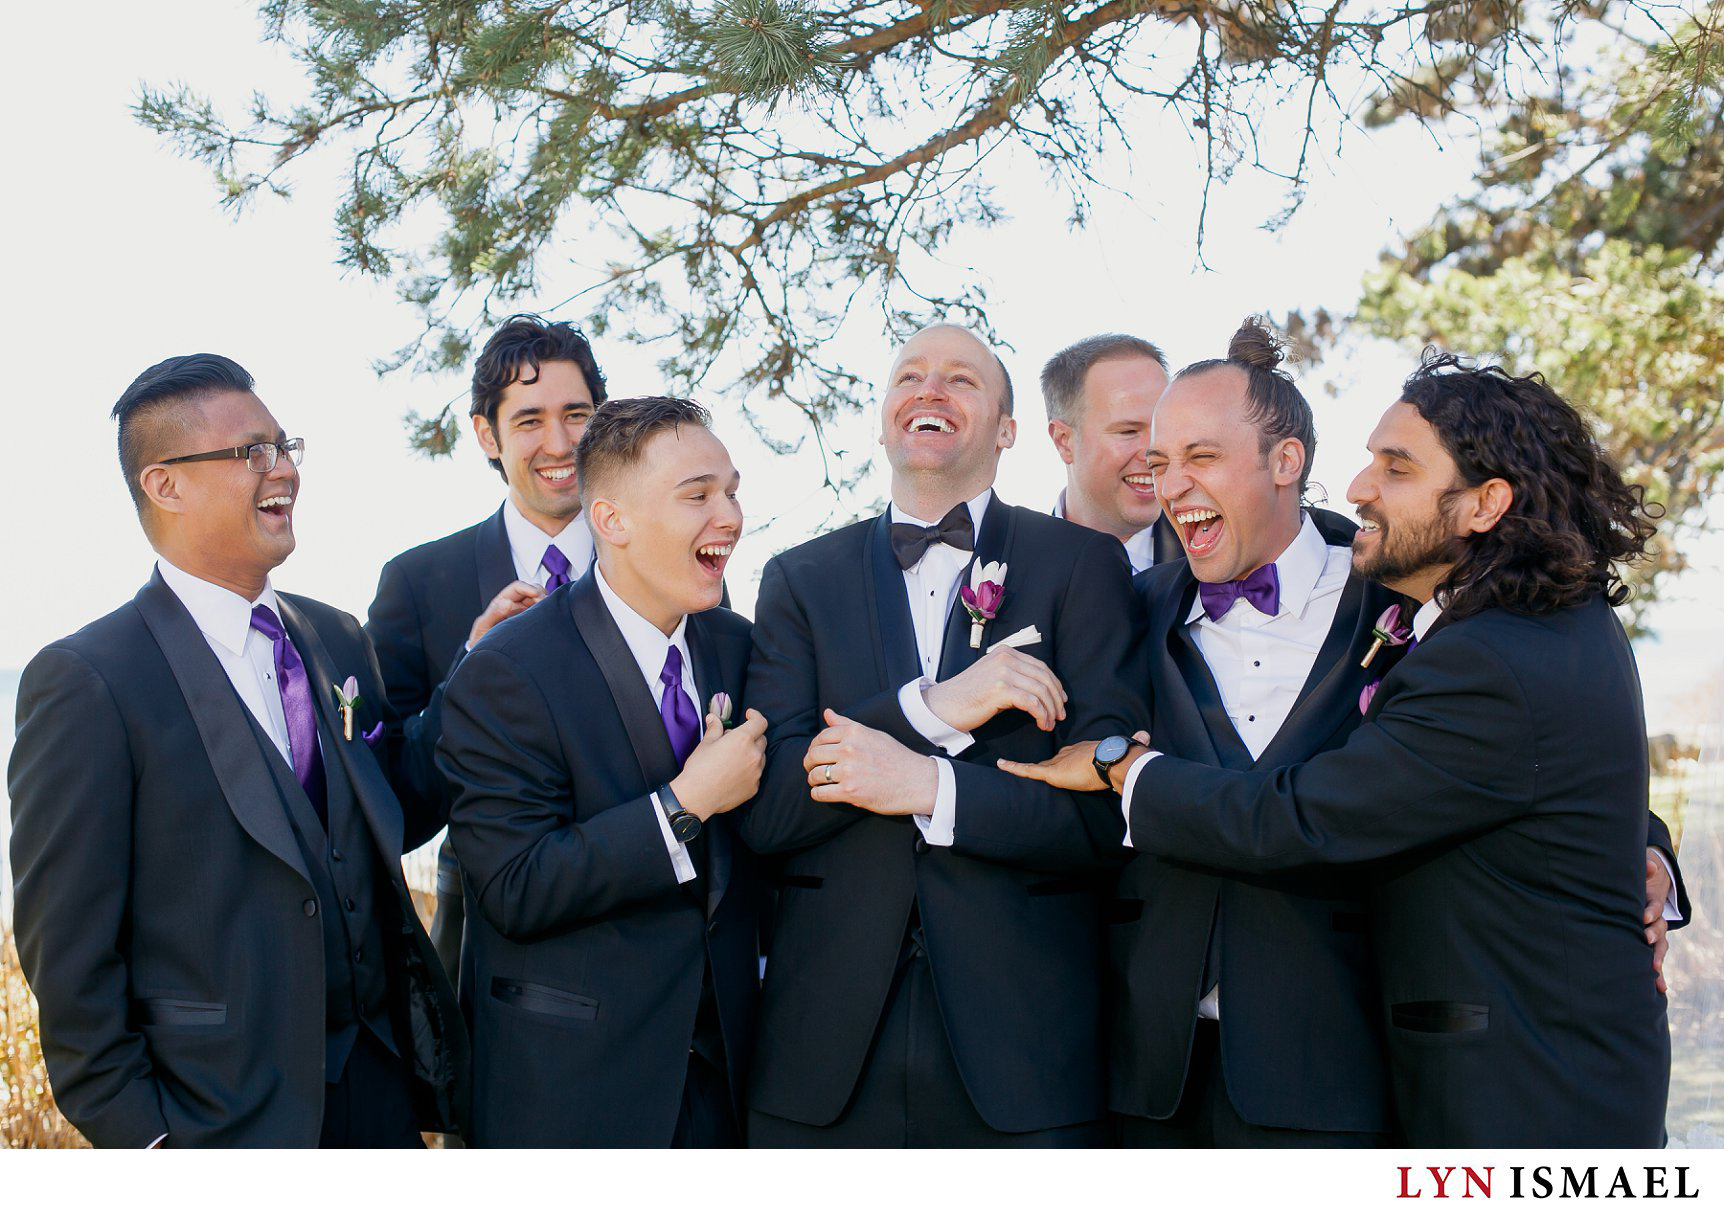 candid portrait of the groom and his groomsmen at Adamson Estate in Mississauga, Ontario.